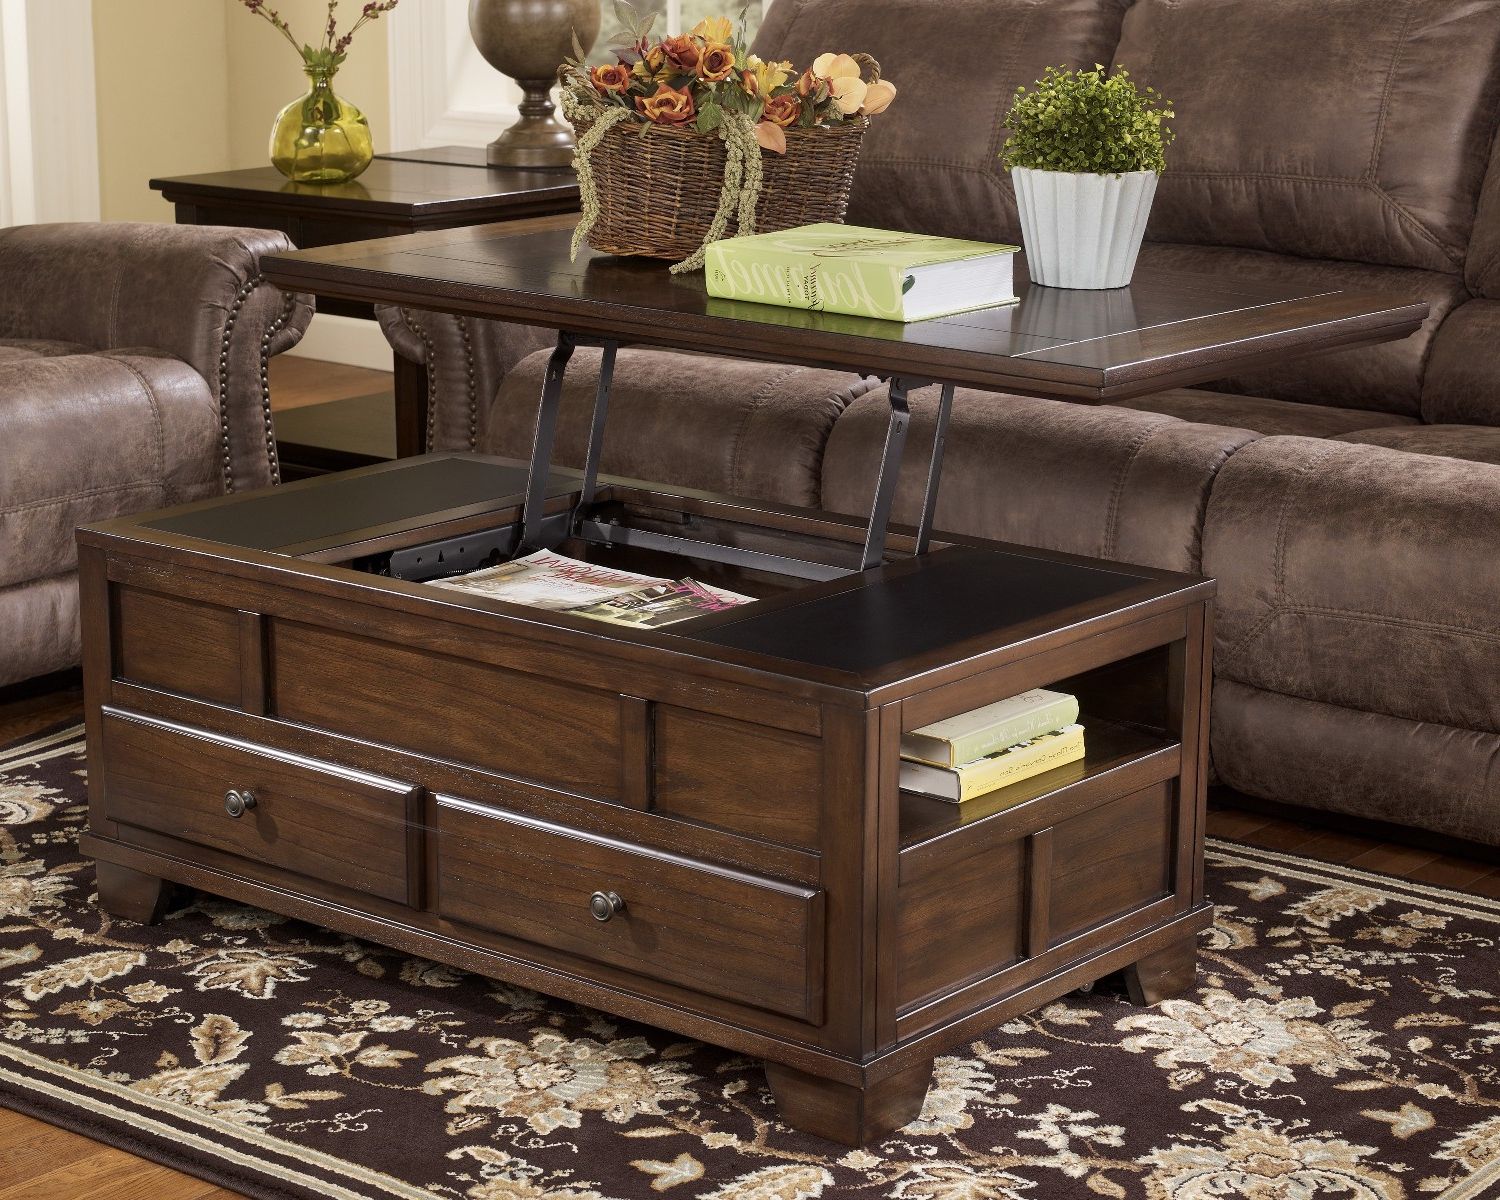 11 Trunk Style Coffee Table Set Pics Within Most Popular Espresso Wood Storage Coffee Tables (View 5 of 20)